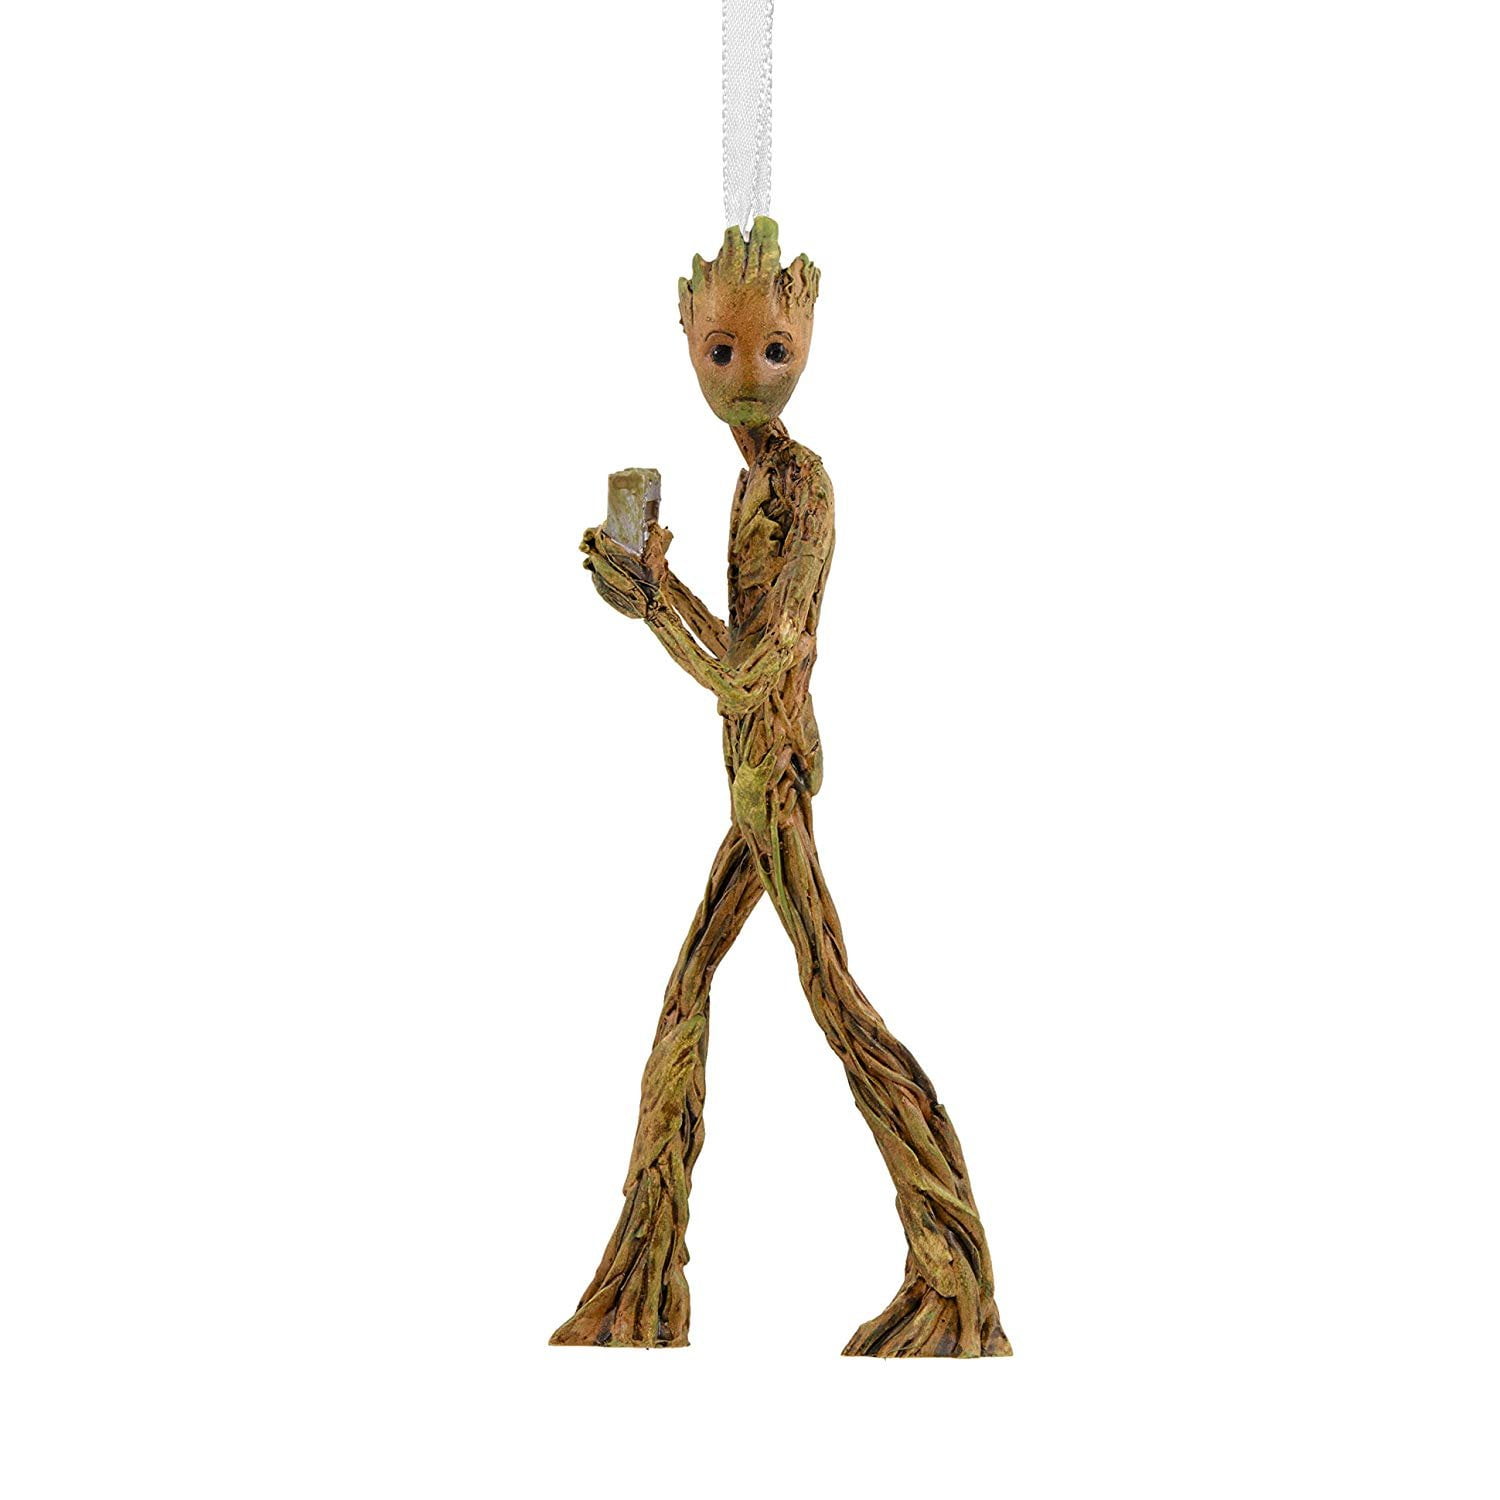 Single or Set of 5 Groot Guardians of the Galaxy Ornaments